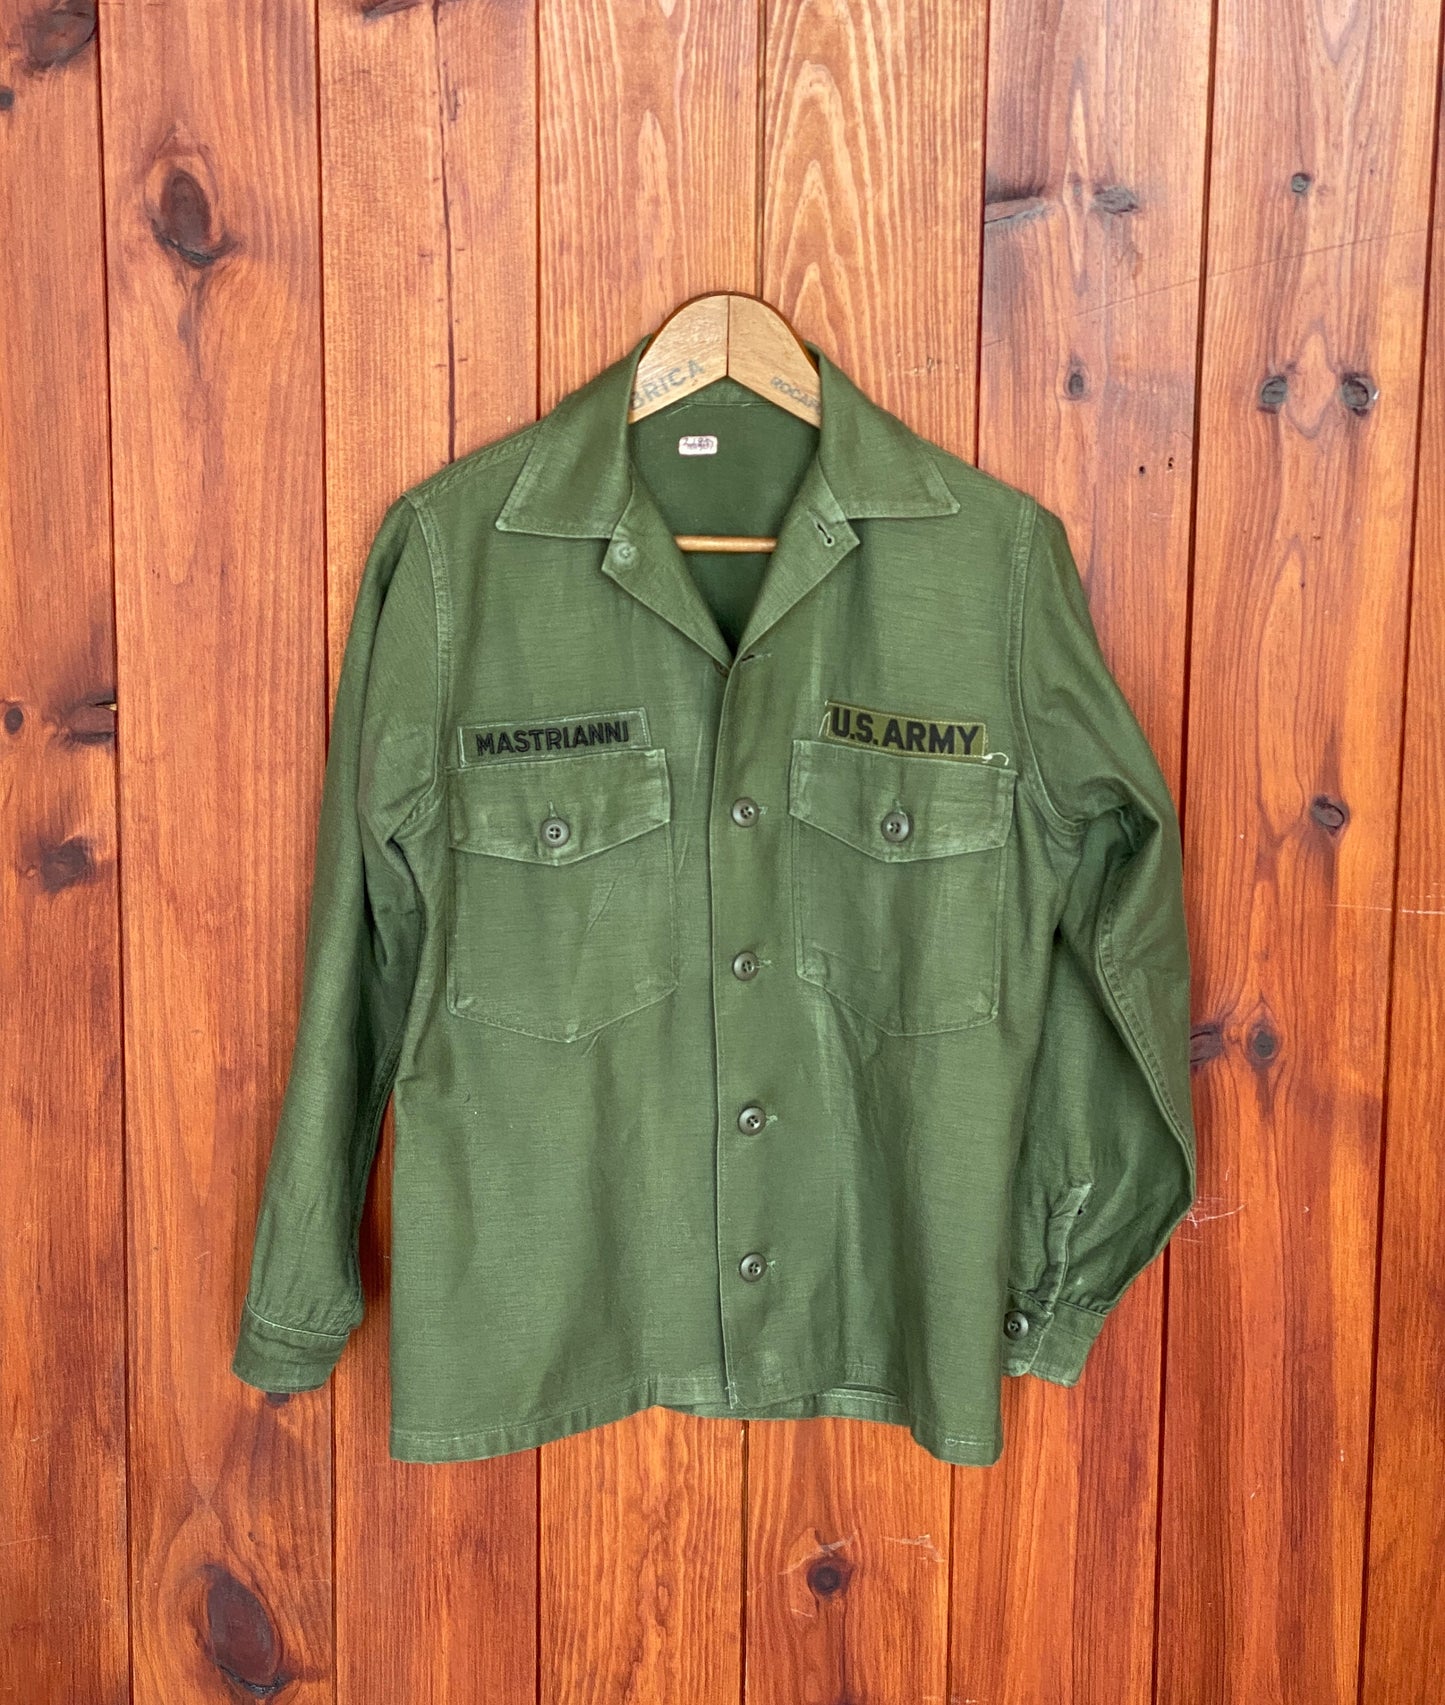 X Small Short. Authentic 60s US Army Type I vintage OG-107 fatigue shirt.